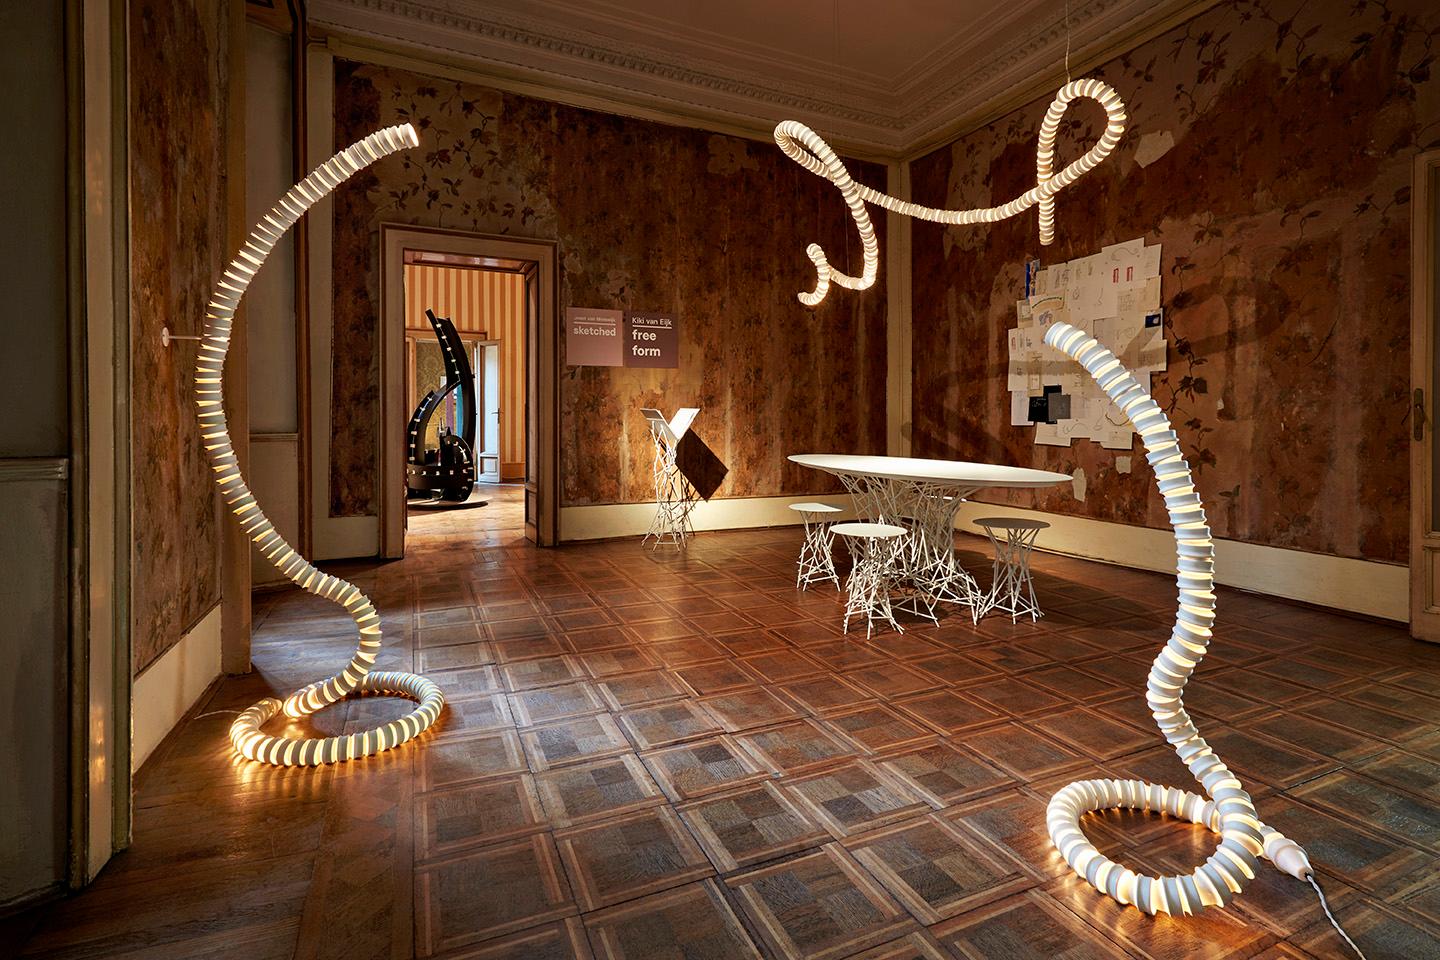 ‘Freeform’ is a series of distinctive and customizable light pieces made from ceramic and LED lighting inspired by old Venetian glass technique used to produce glass chandeliers. The abstract shapes of the lamps are inspired by the repetition of